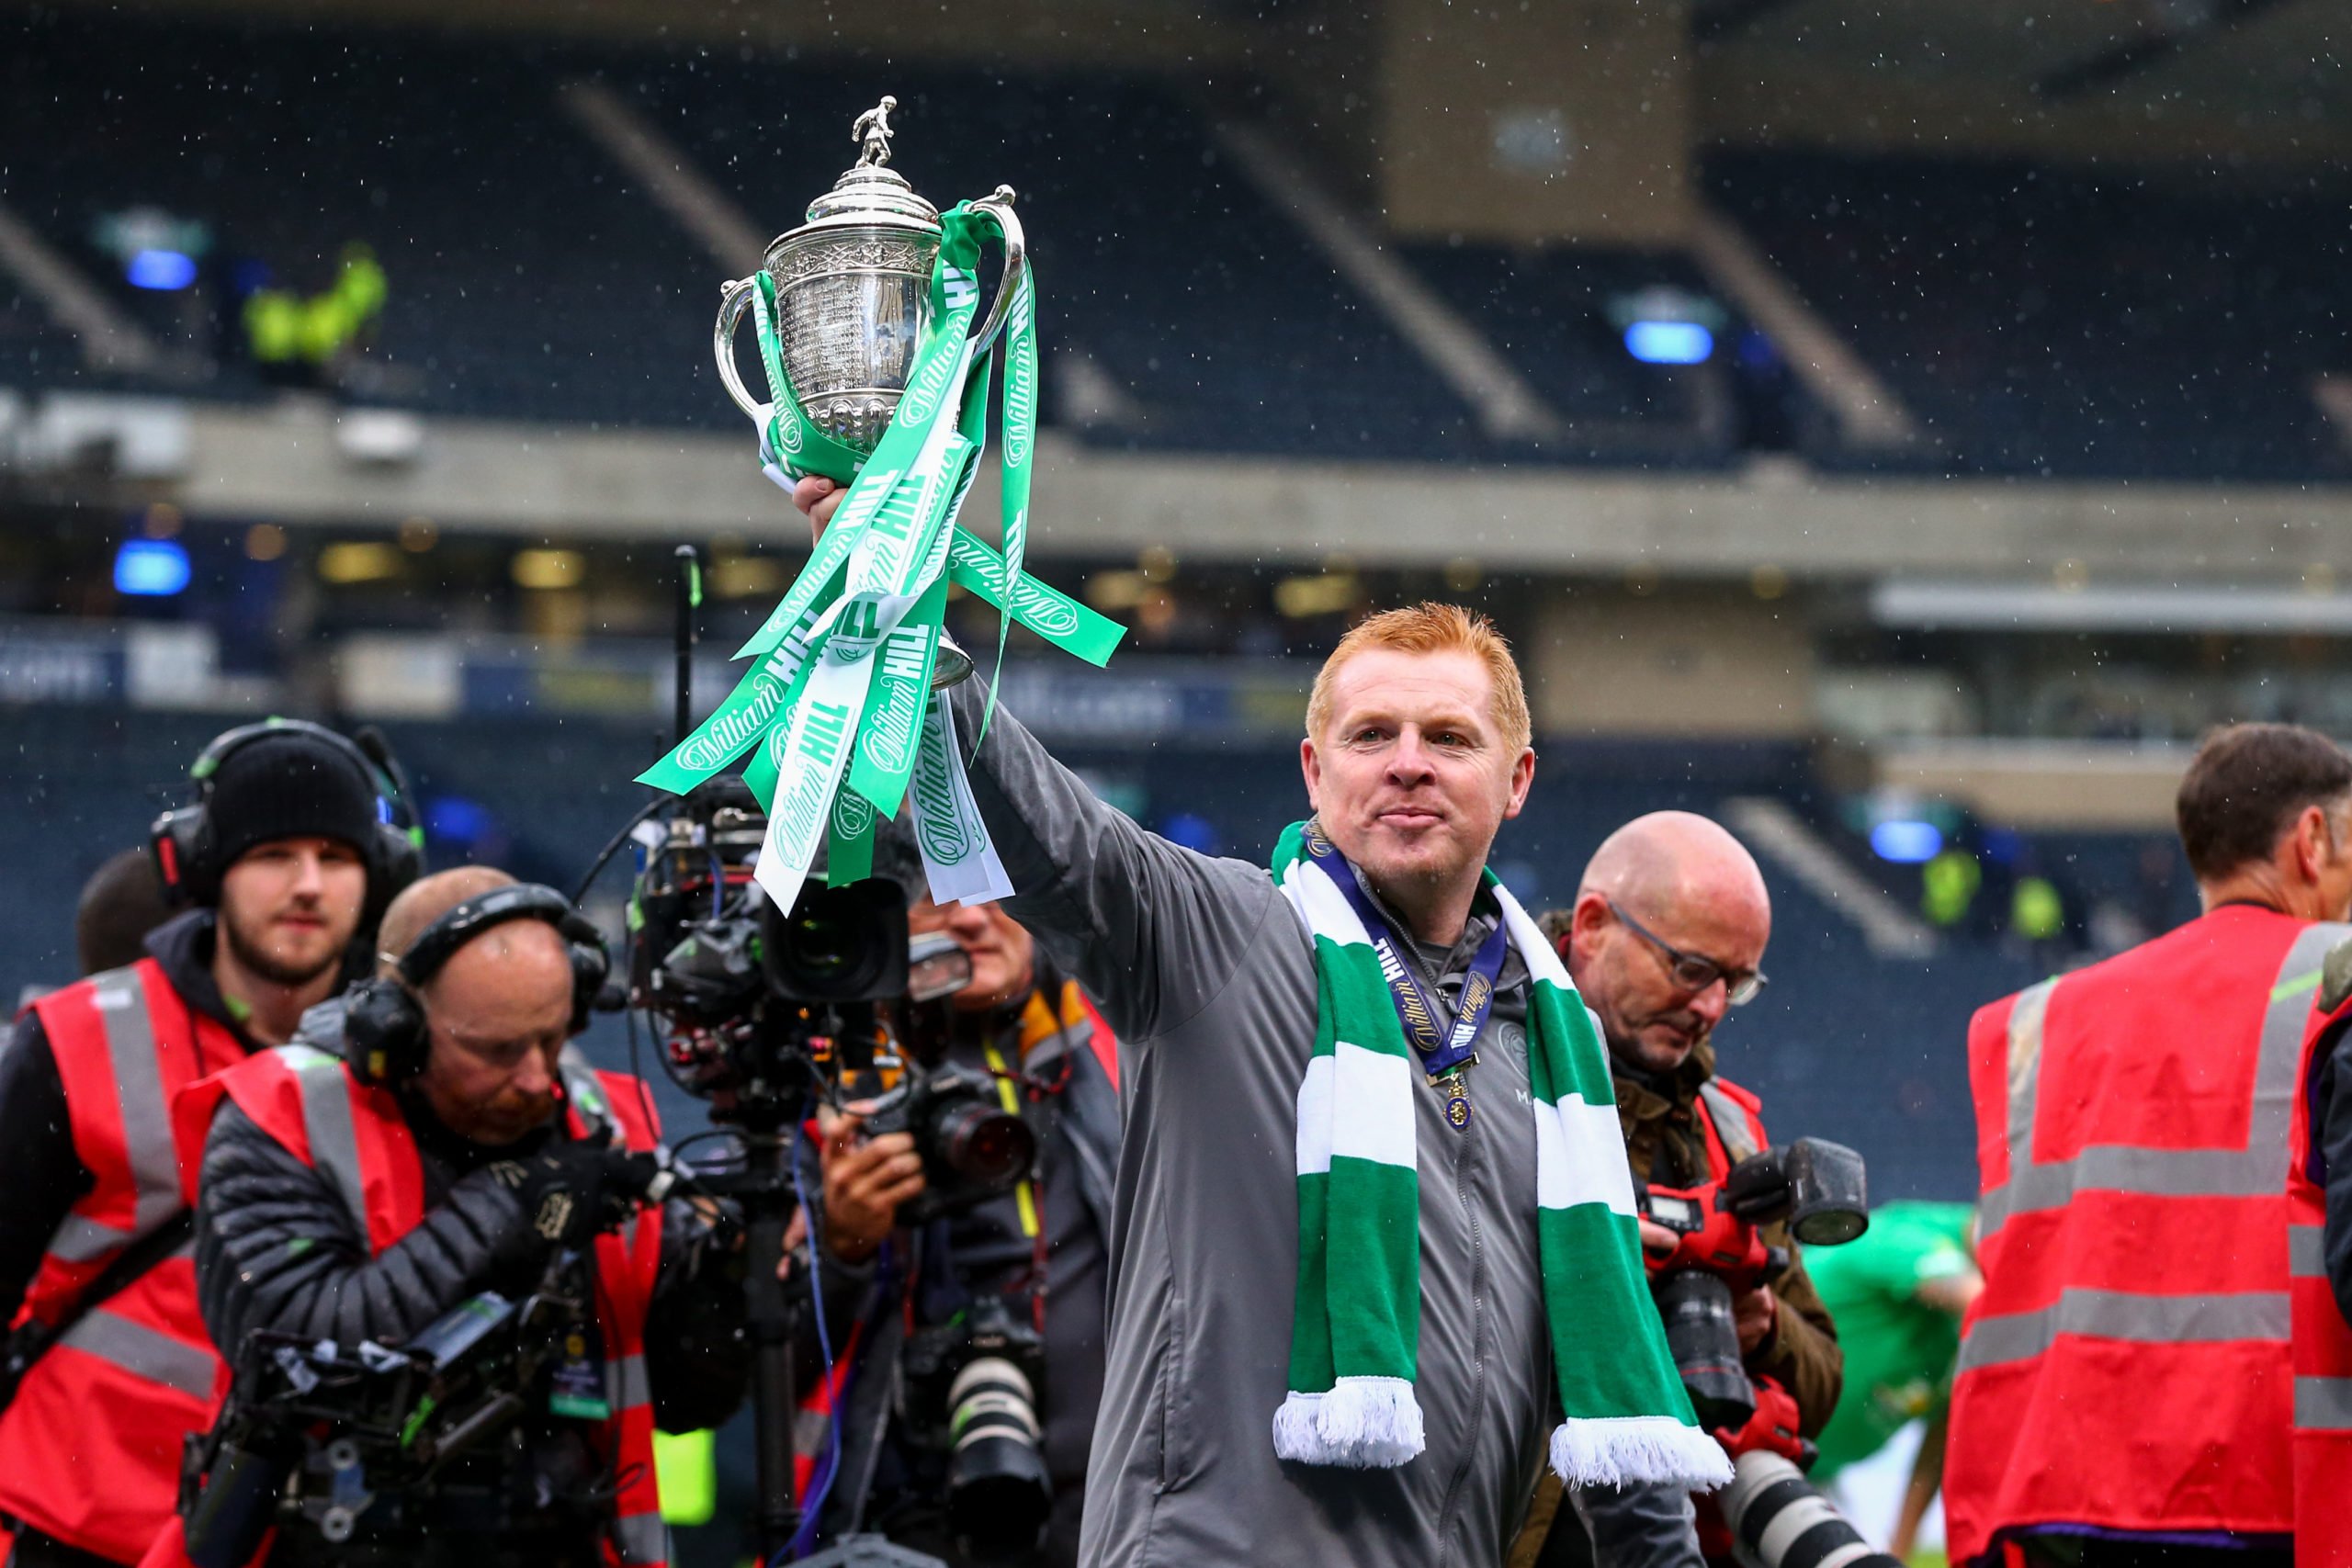 'Two games away from a quadruple treble'; BBC's Michael Stewart issues positive Celtic reminder